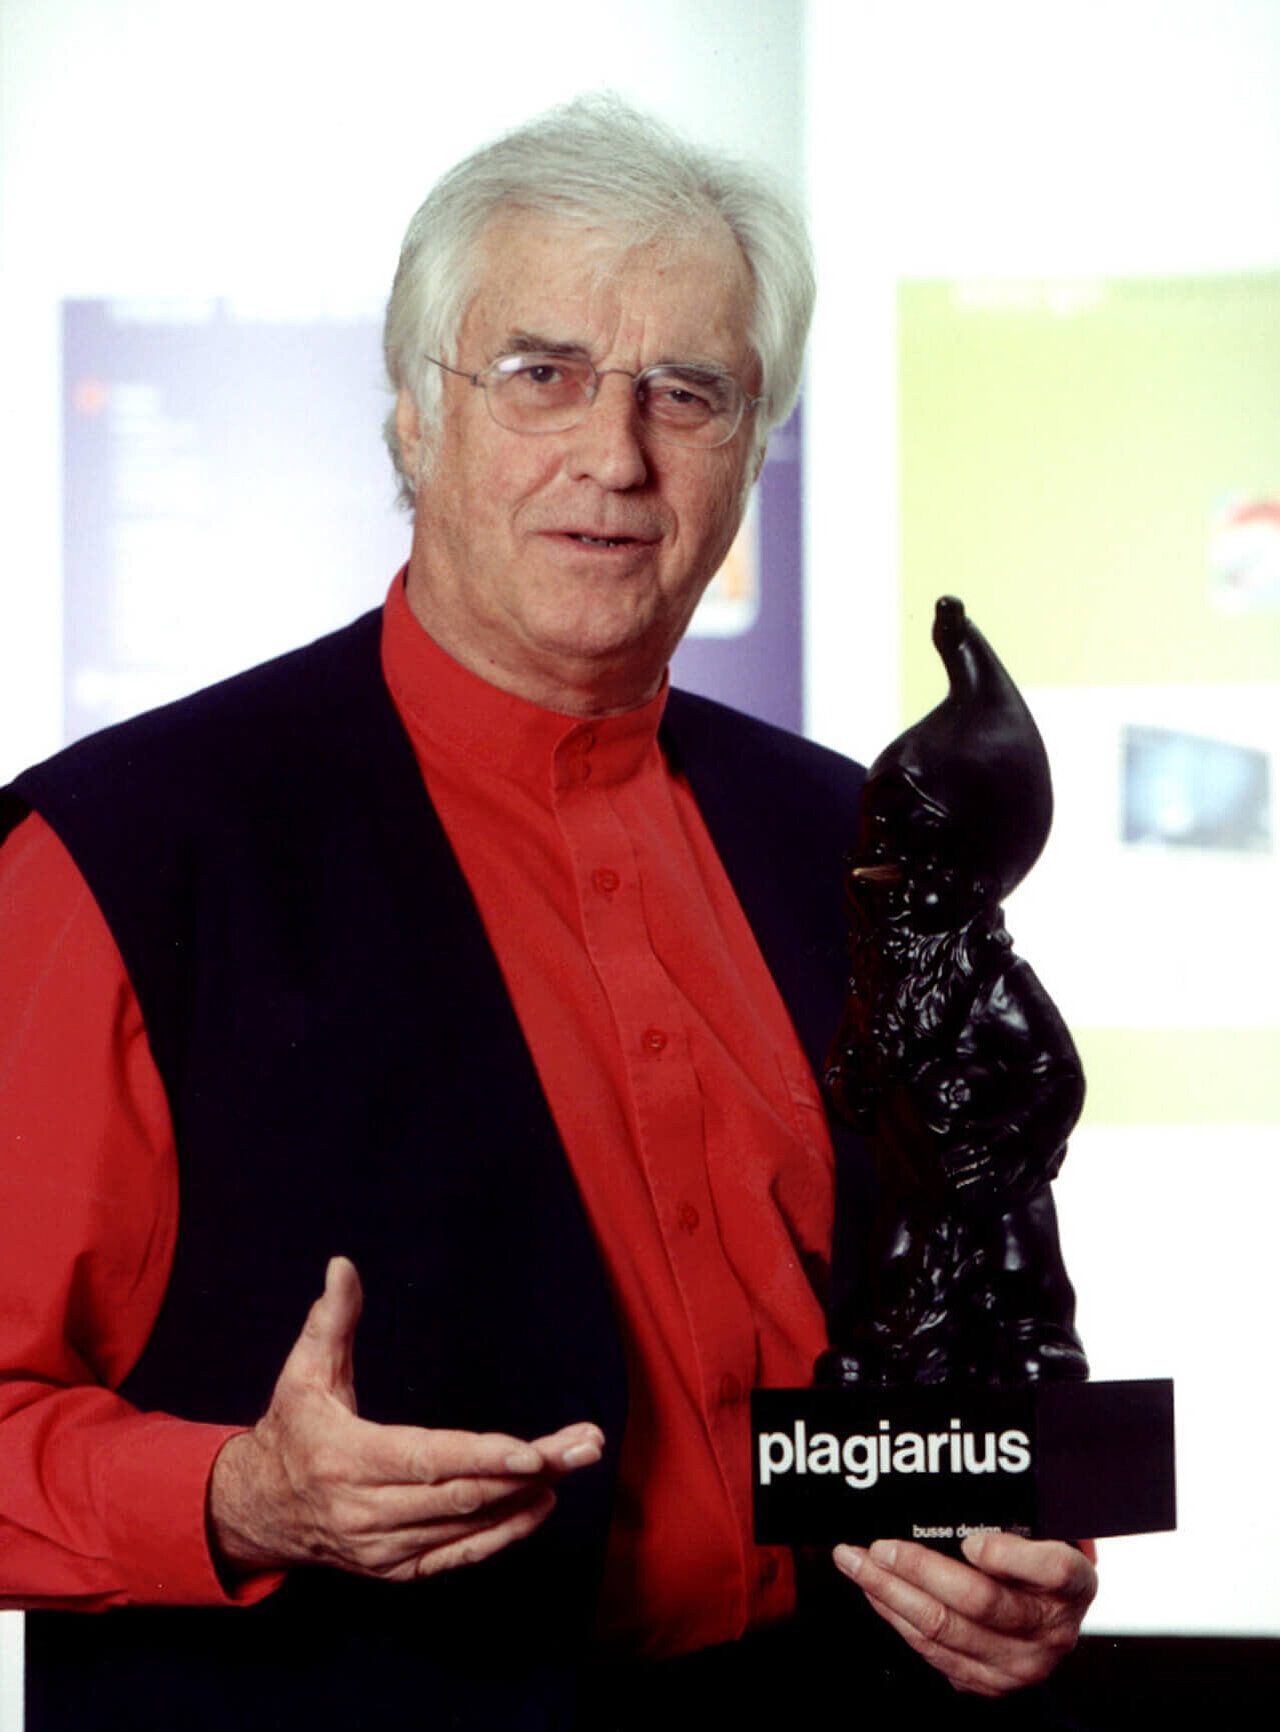 Rido Busse with the Plagiarius prize